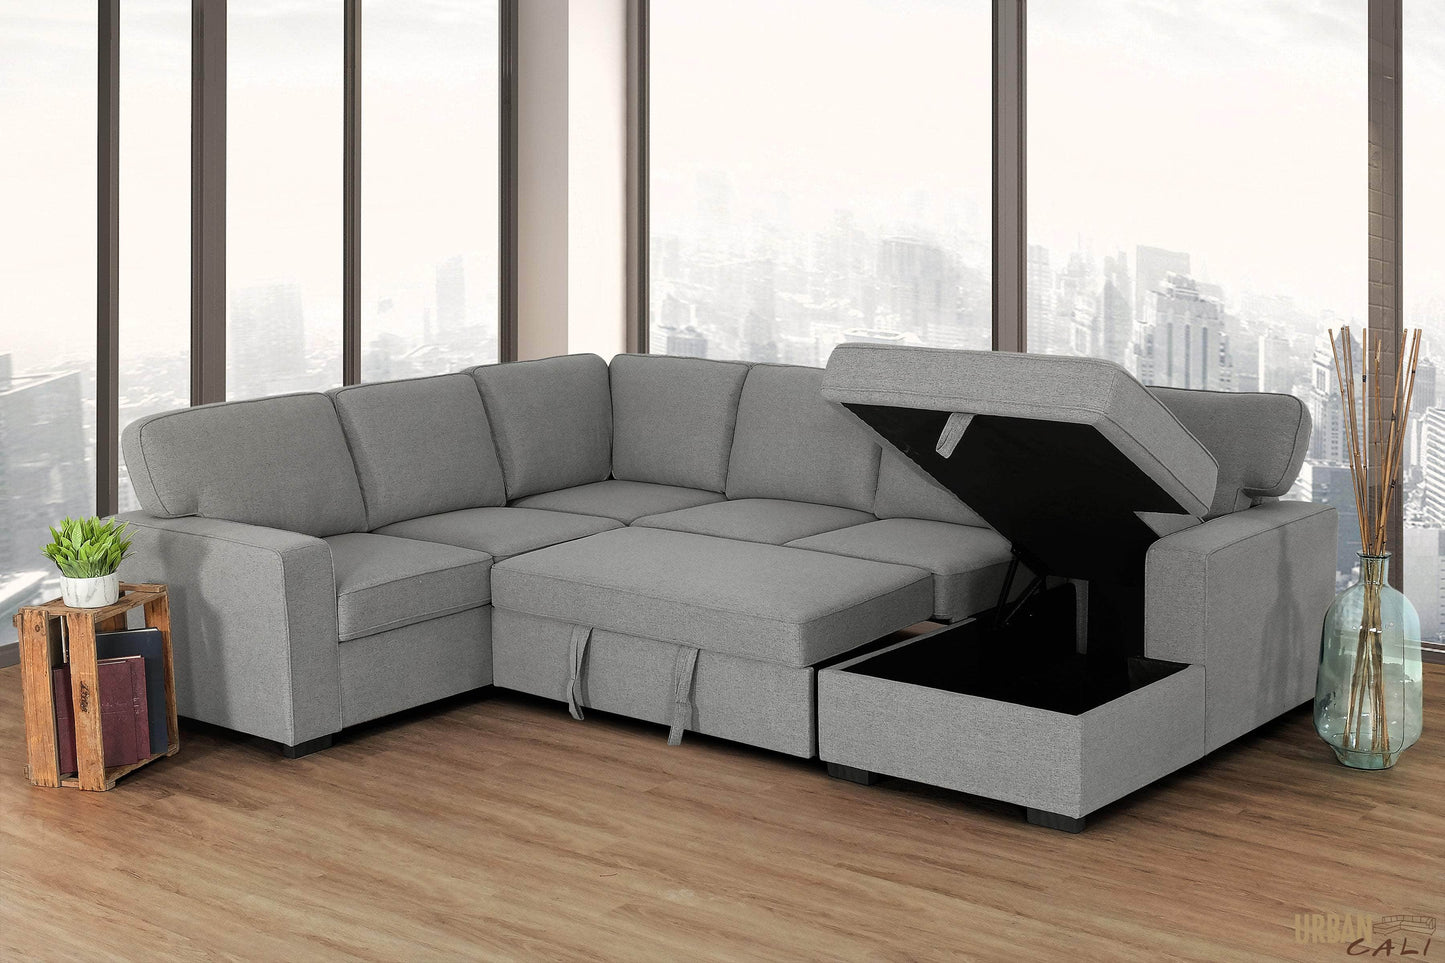 Pending - Urban Cali Sectional Sofa Right Facing Chaise Santa Cruz Large Sleeper Sectional Sofa Bed with Storage Chaise